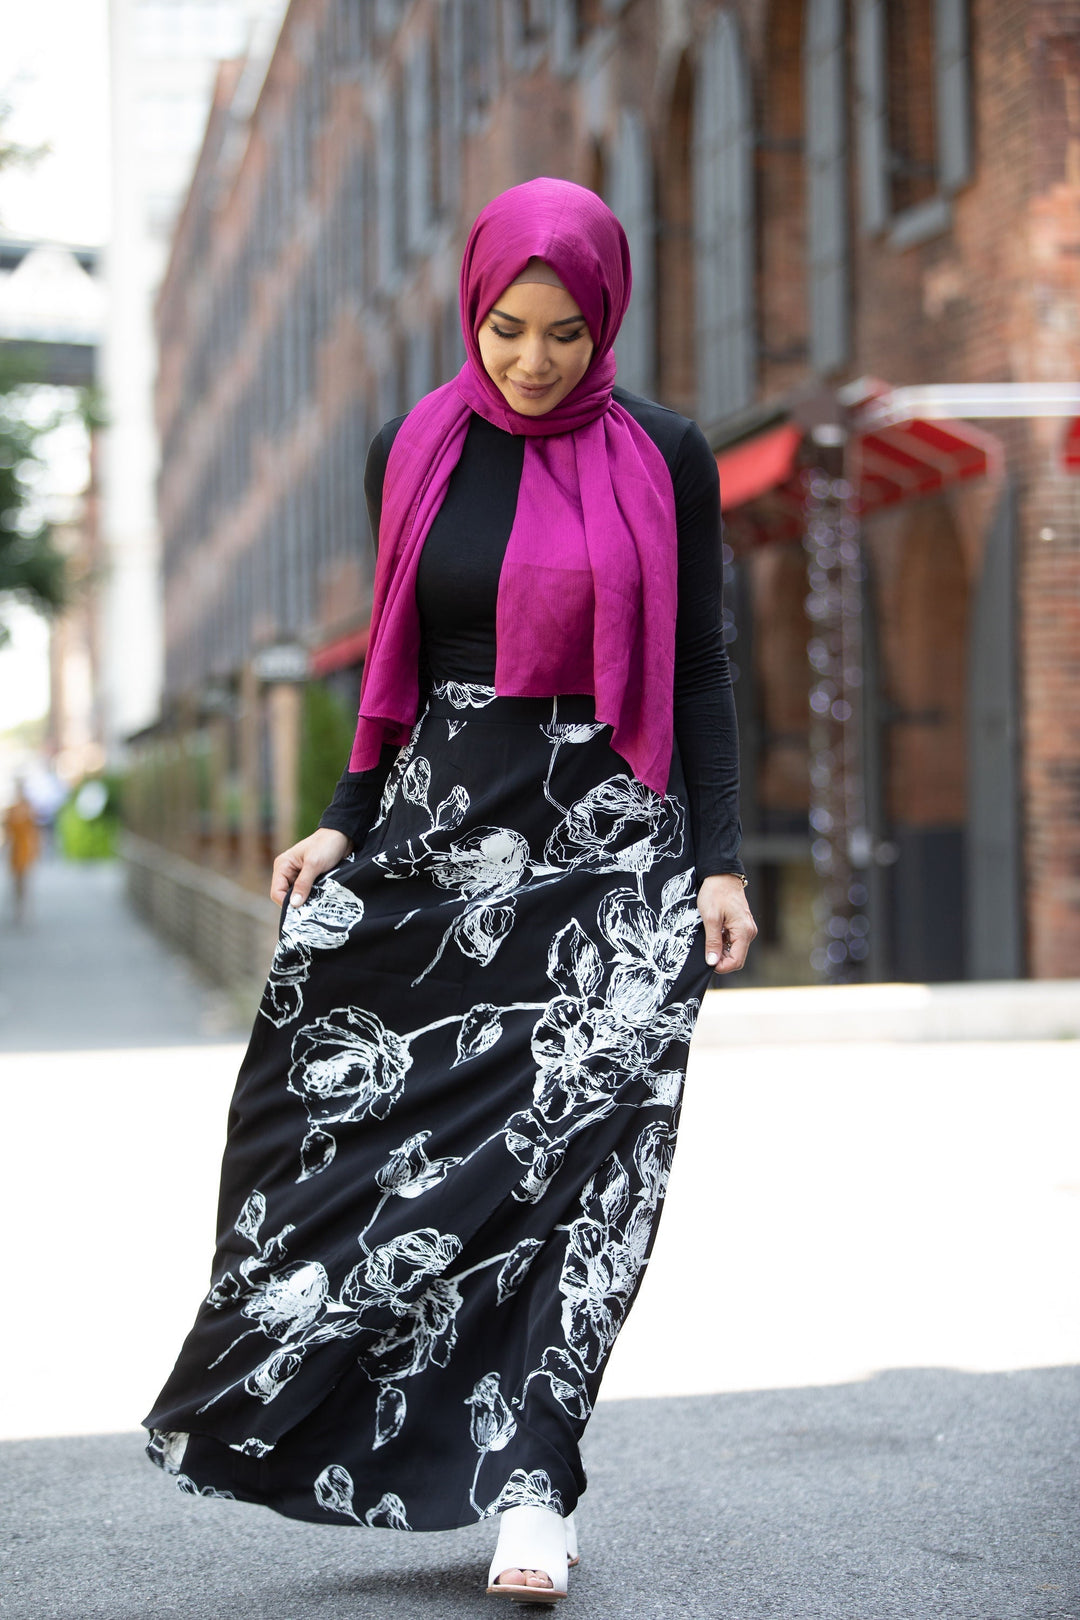 Urban Modesty - Floral Lines Black and White Maxi Skirt